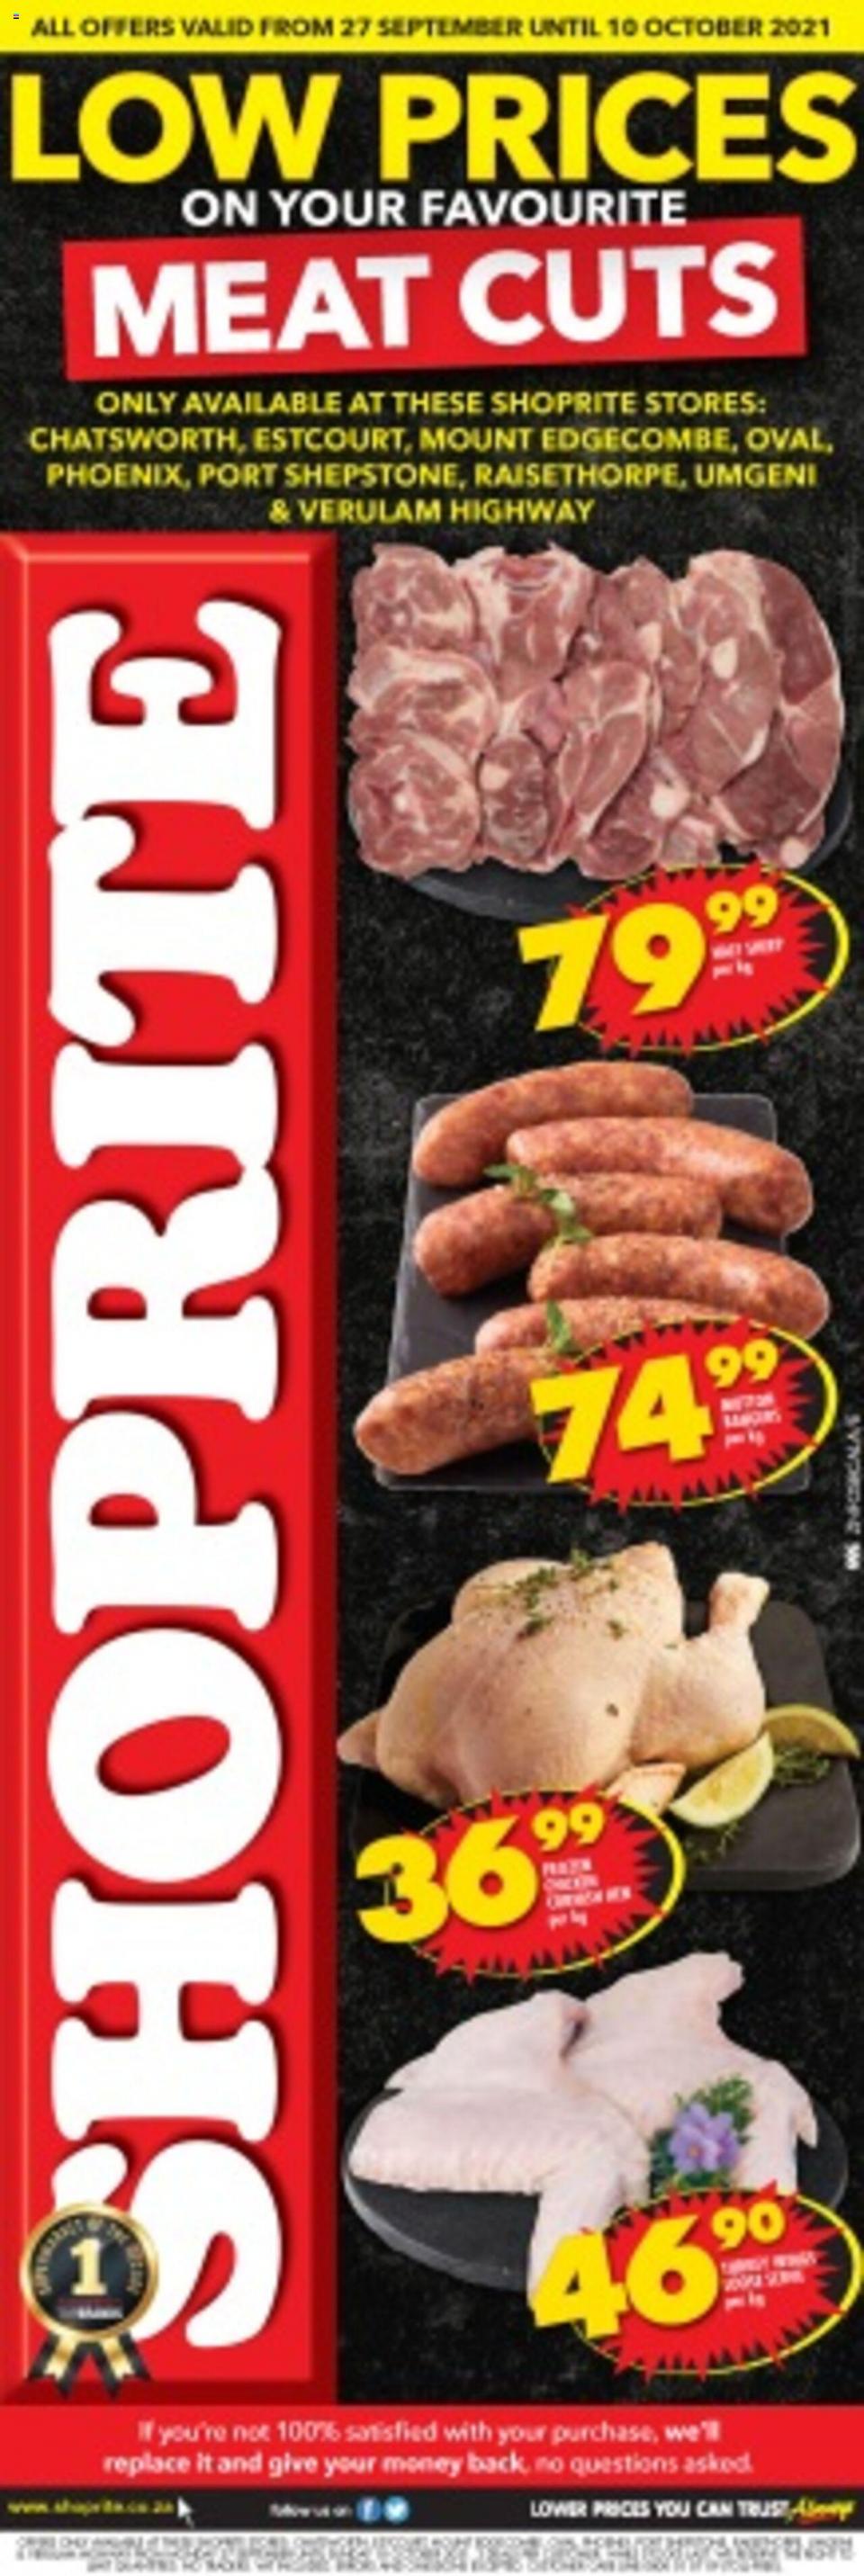 Shoprite Specials Low Prices On Meat Cuts 27 Sep – 10 Oct 2021